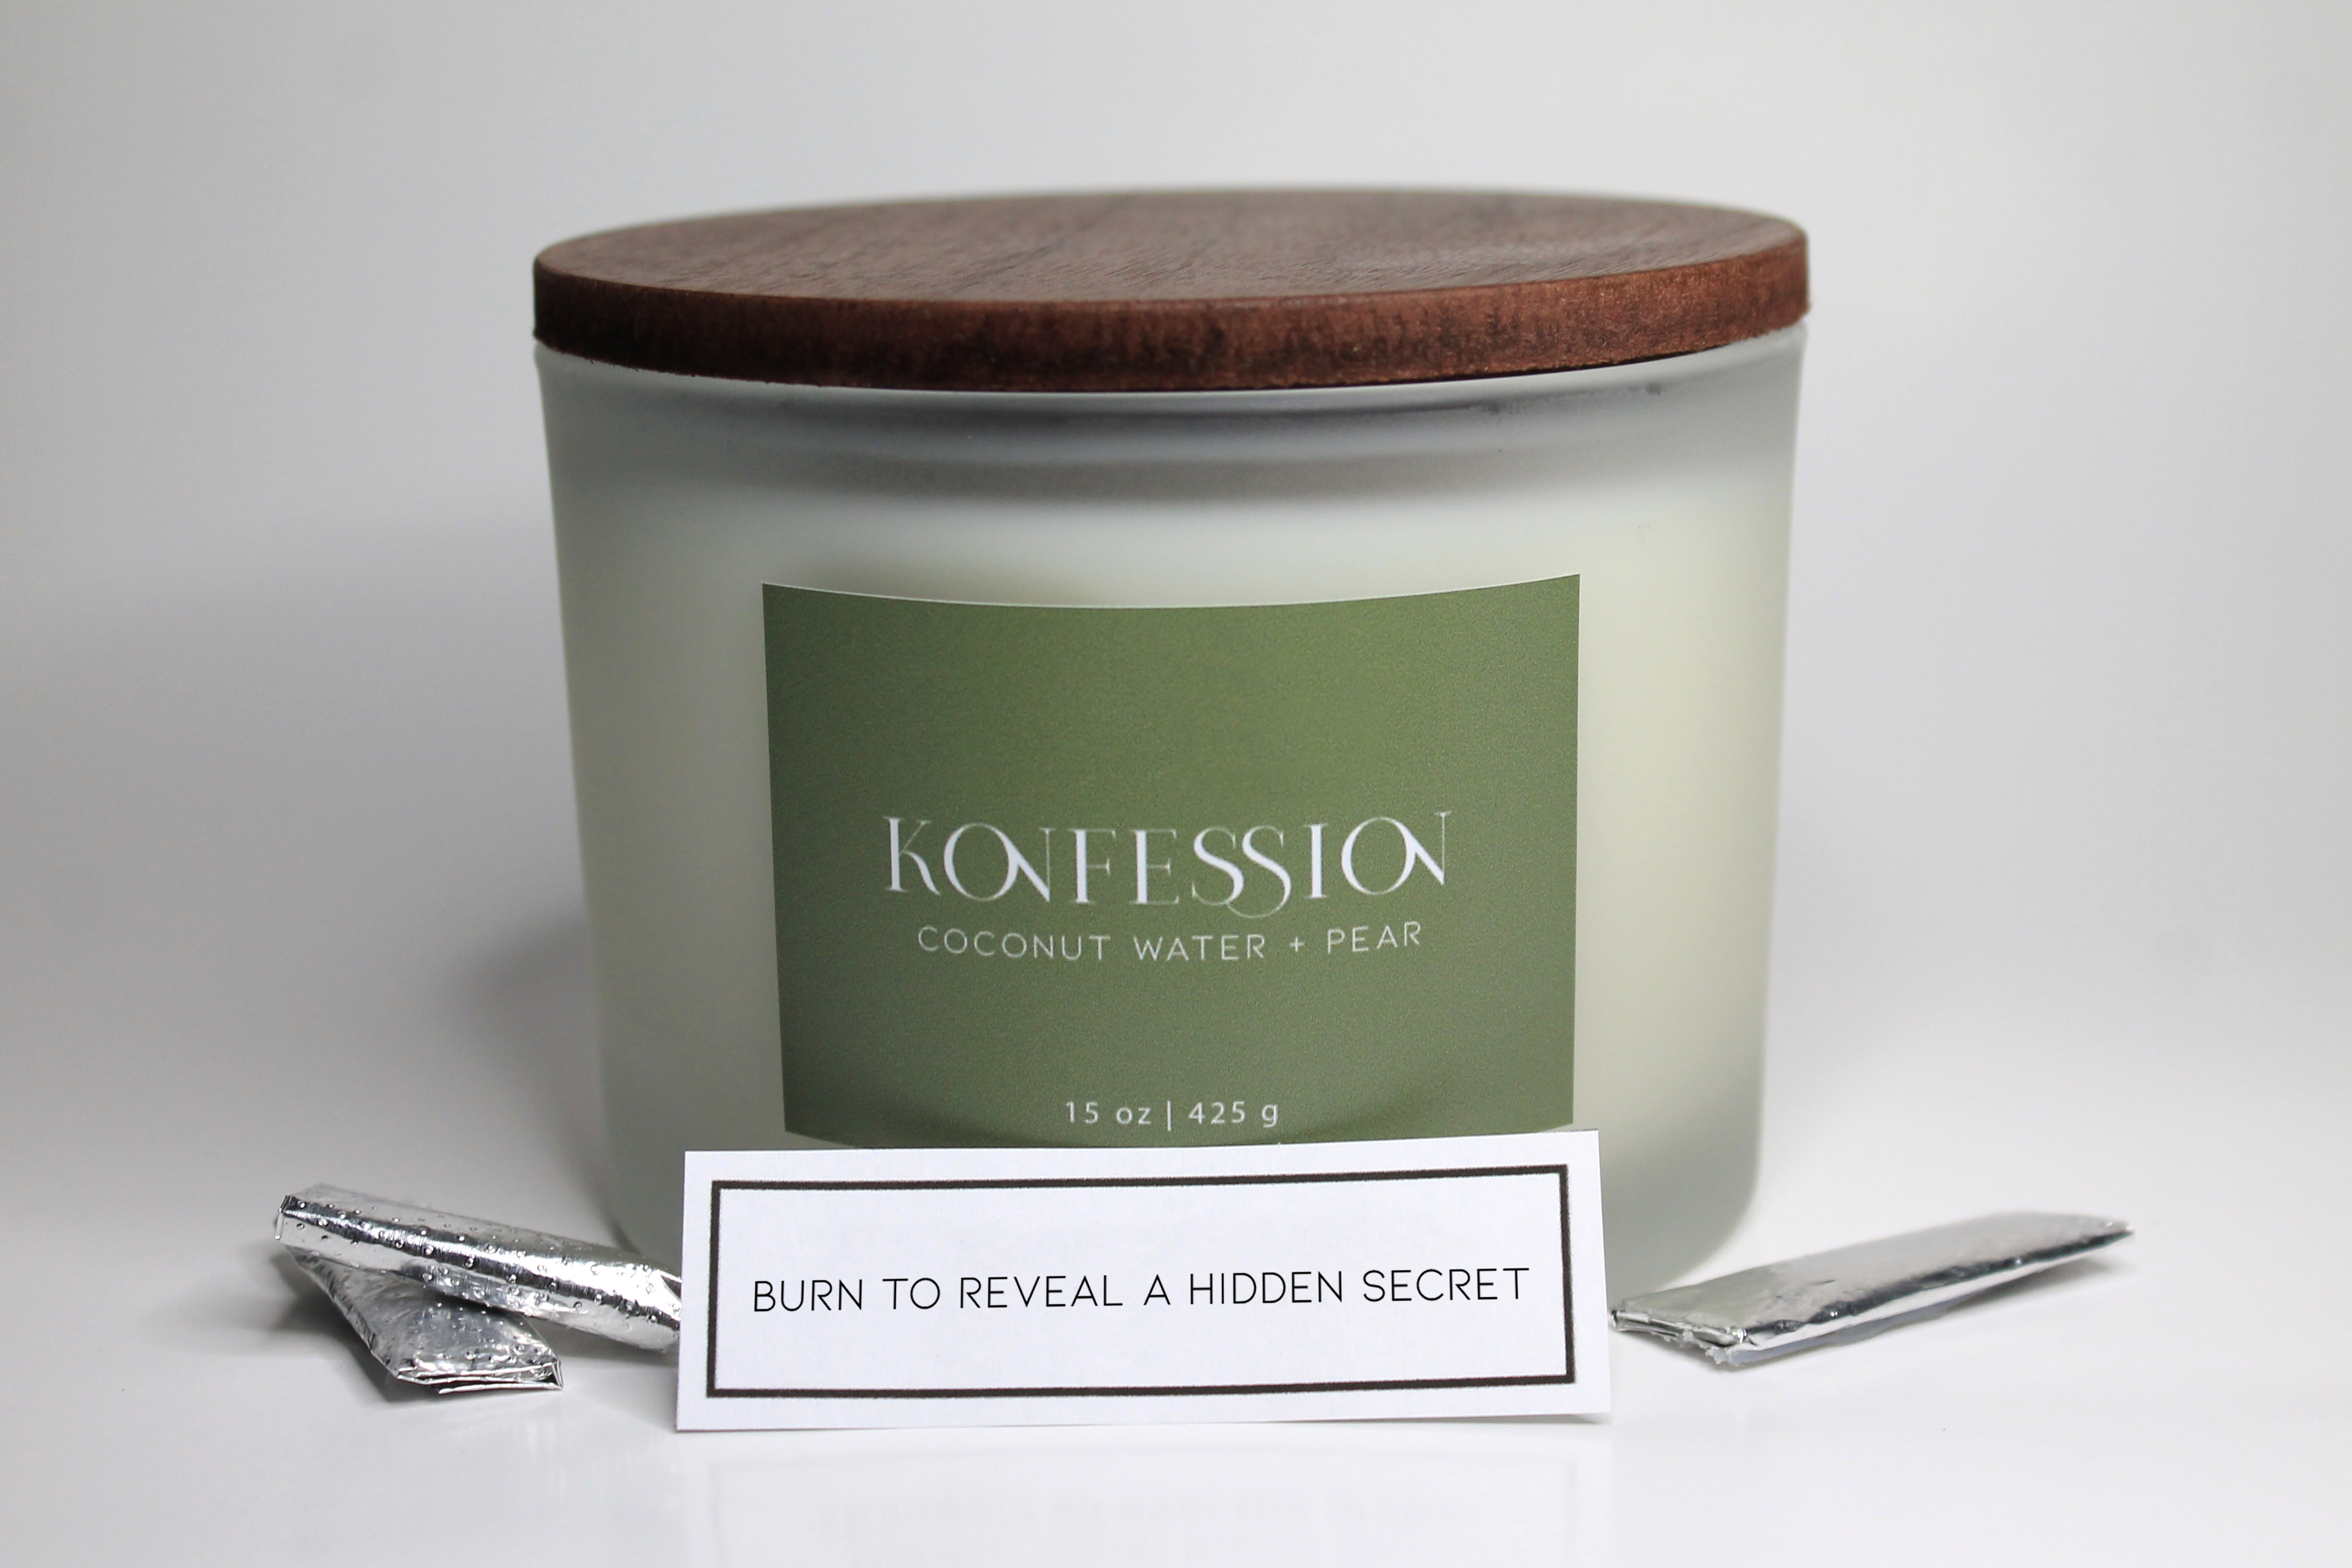 Each candle comes with a hidden secret inside sent in by strangers from around the world. Burn to reveal a hidden secret.  